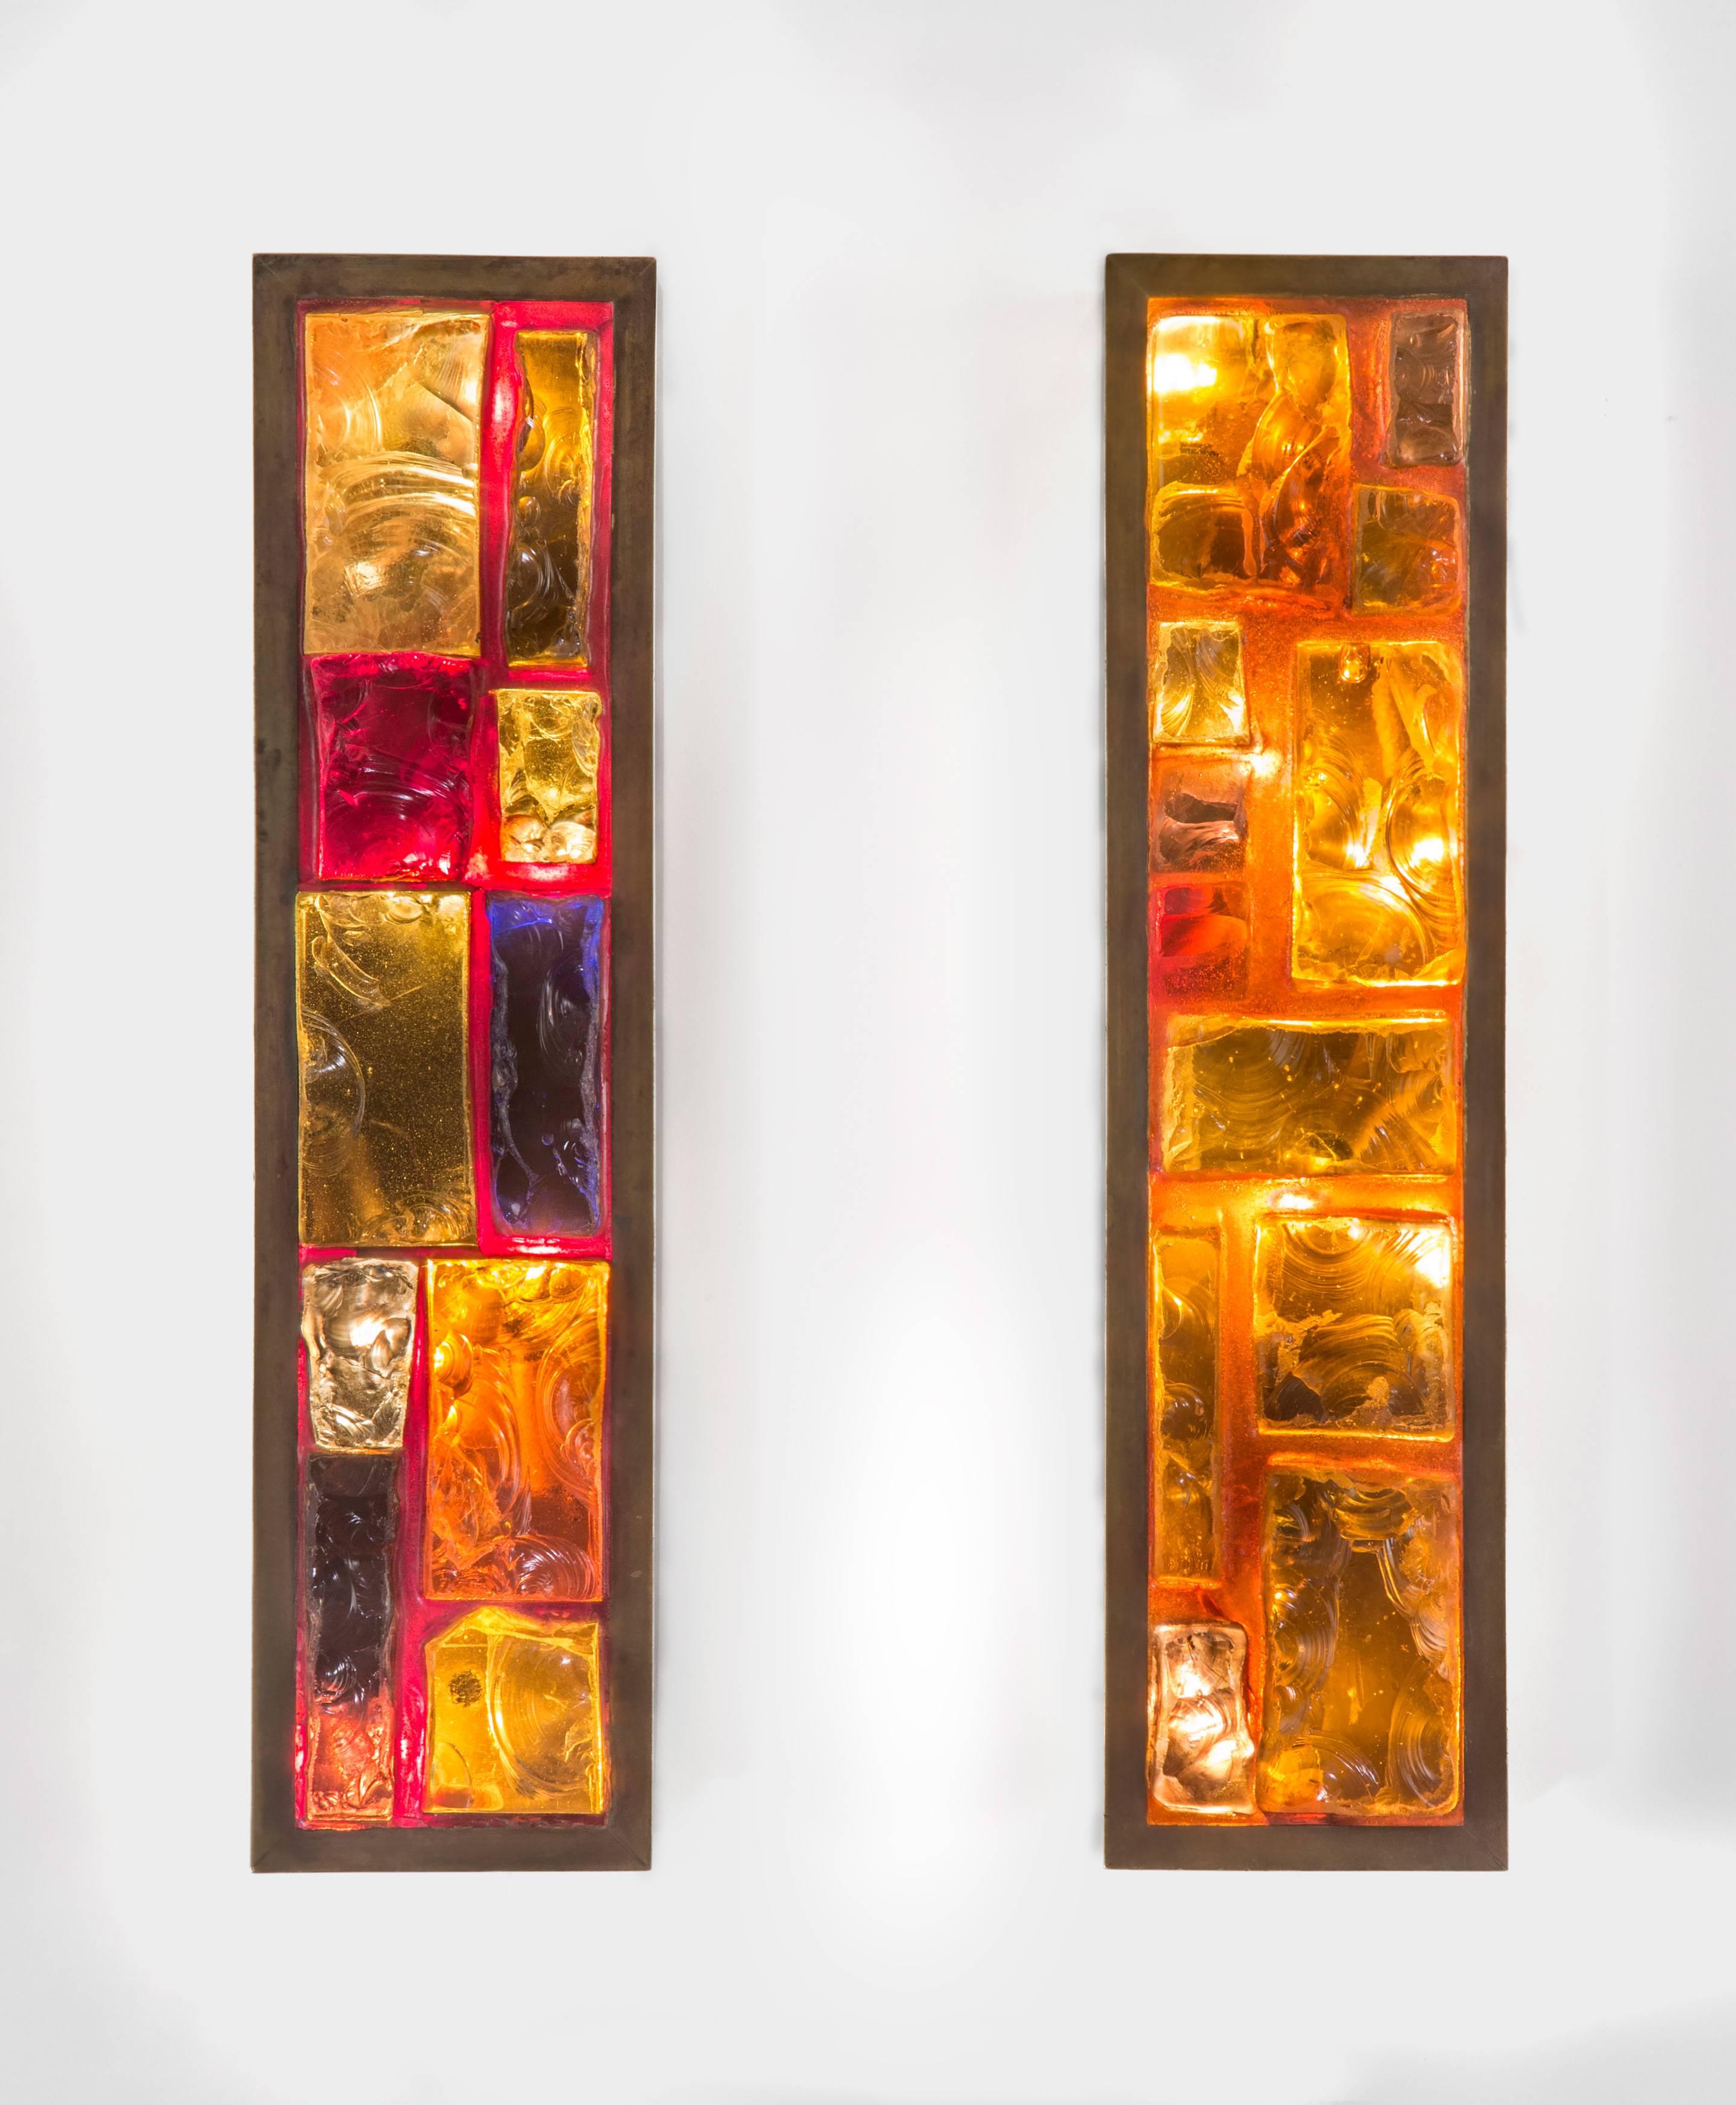 A pair of French bronze and resin sconces
Mid-20th century
Midcentury excellence in an imaginative design and a superior realization. The raised and textured multicolored resin panel within a perfectly executed bronze frame.
Could be hung